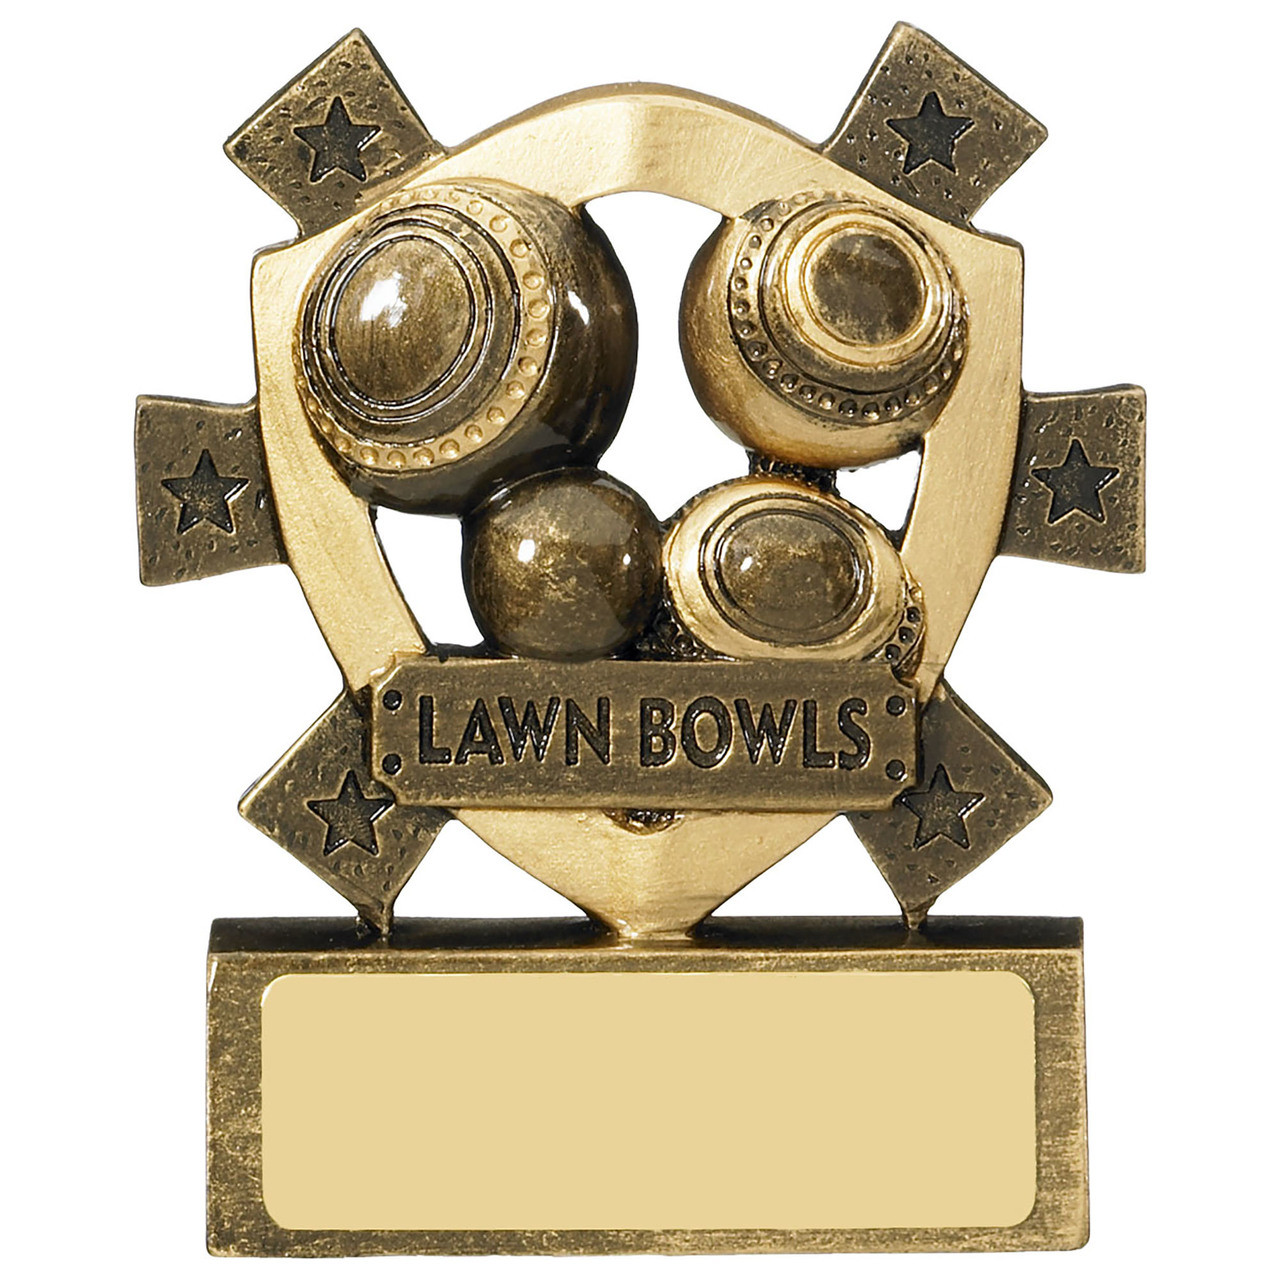 Mini Shield Lawn Bowls Trophy. Cheap, inexpensive award ONLY £3.50 at 1stPlace4trophies